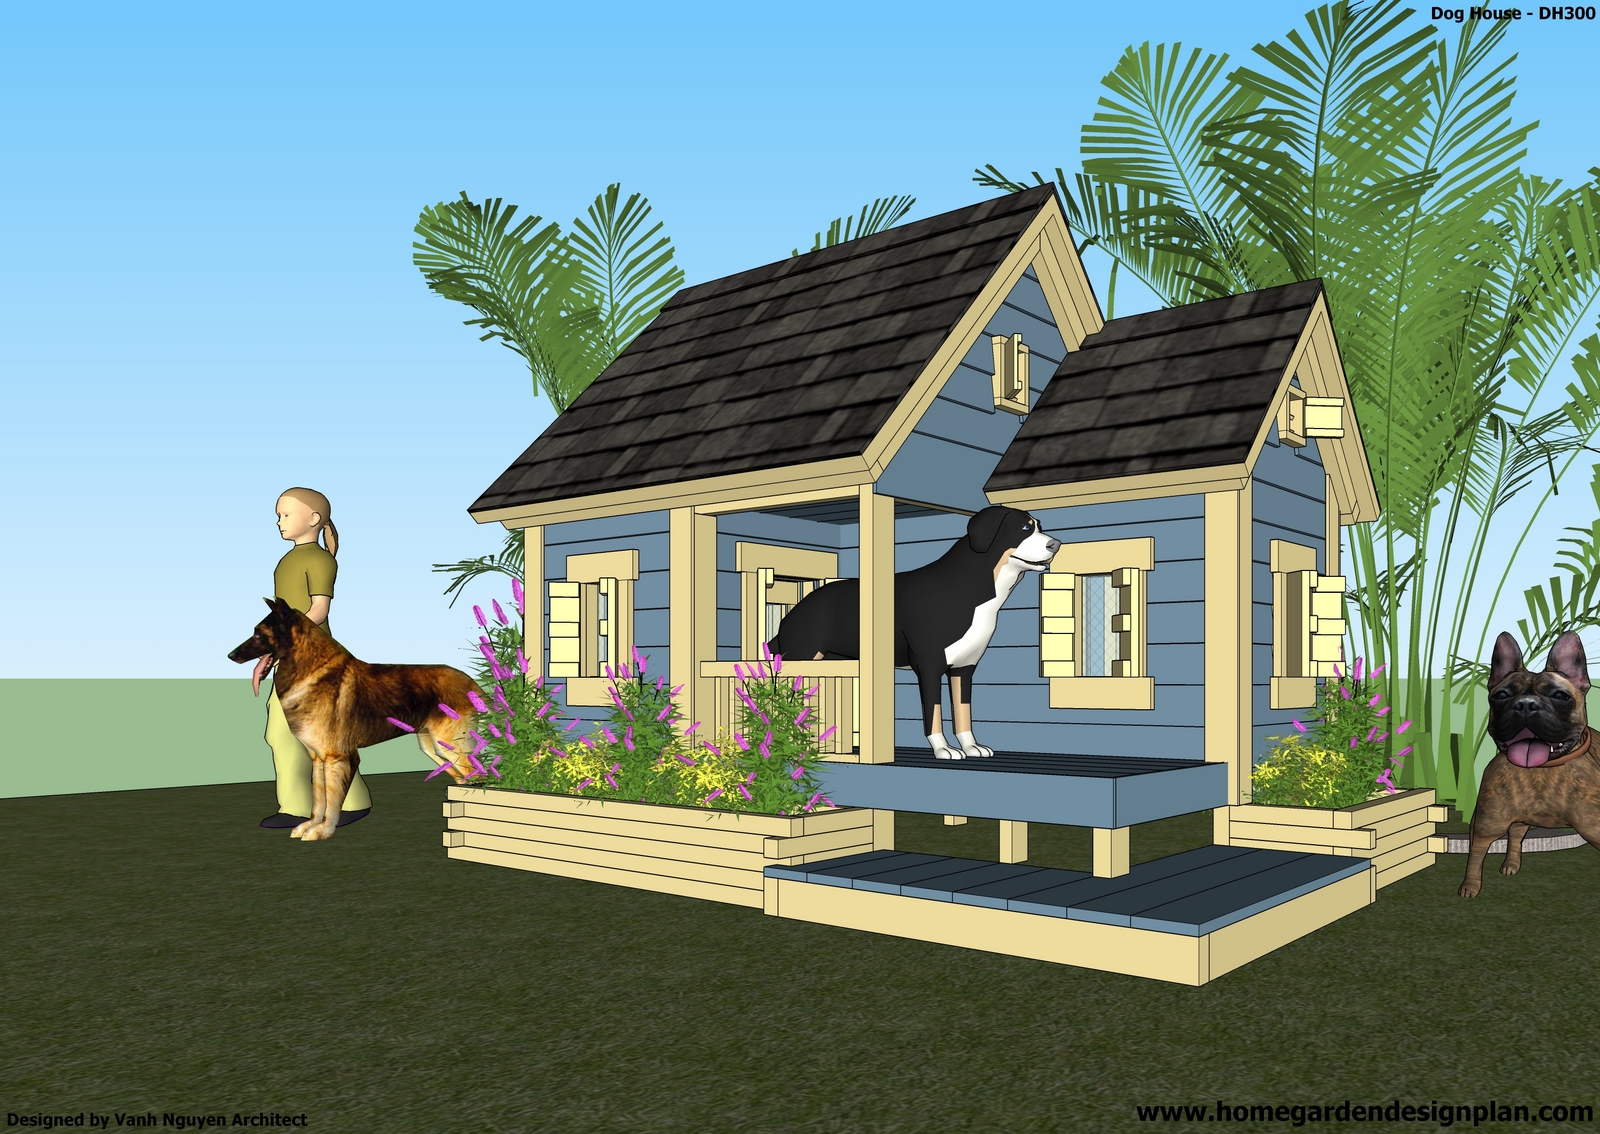 DH300 - Dog House Plans Free - How to Build an Insulated Dog House 